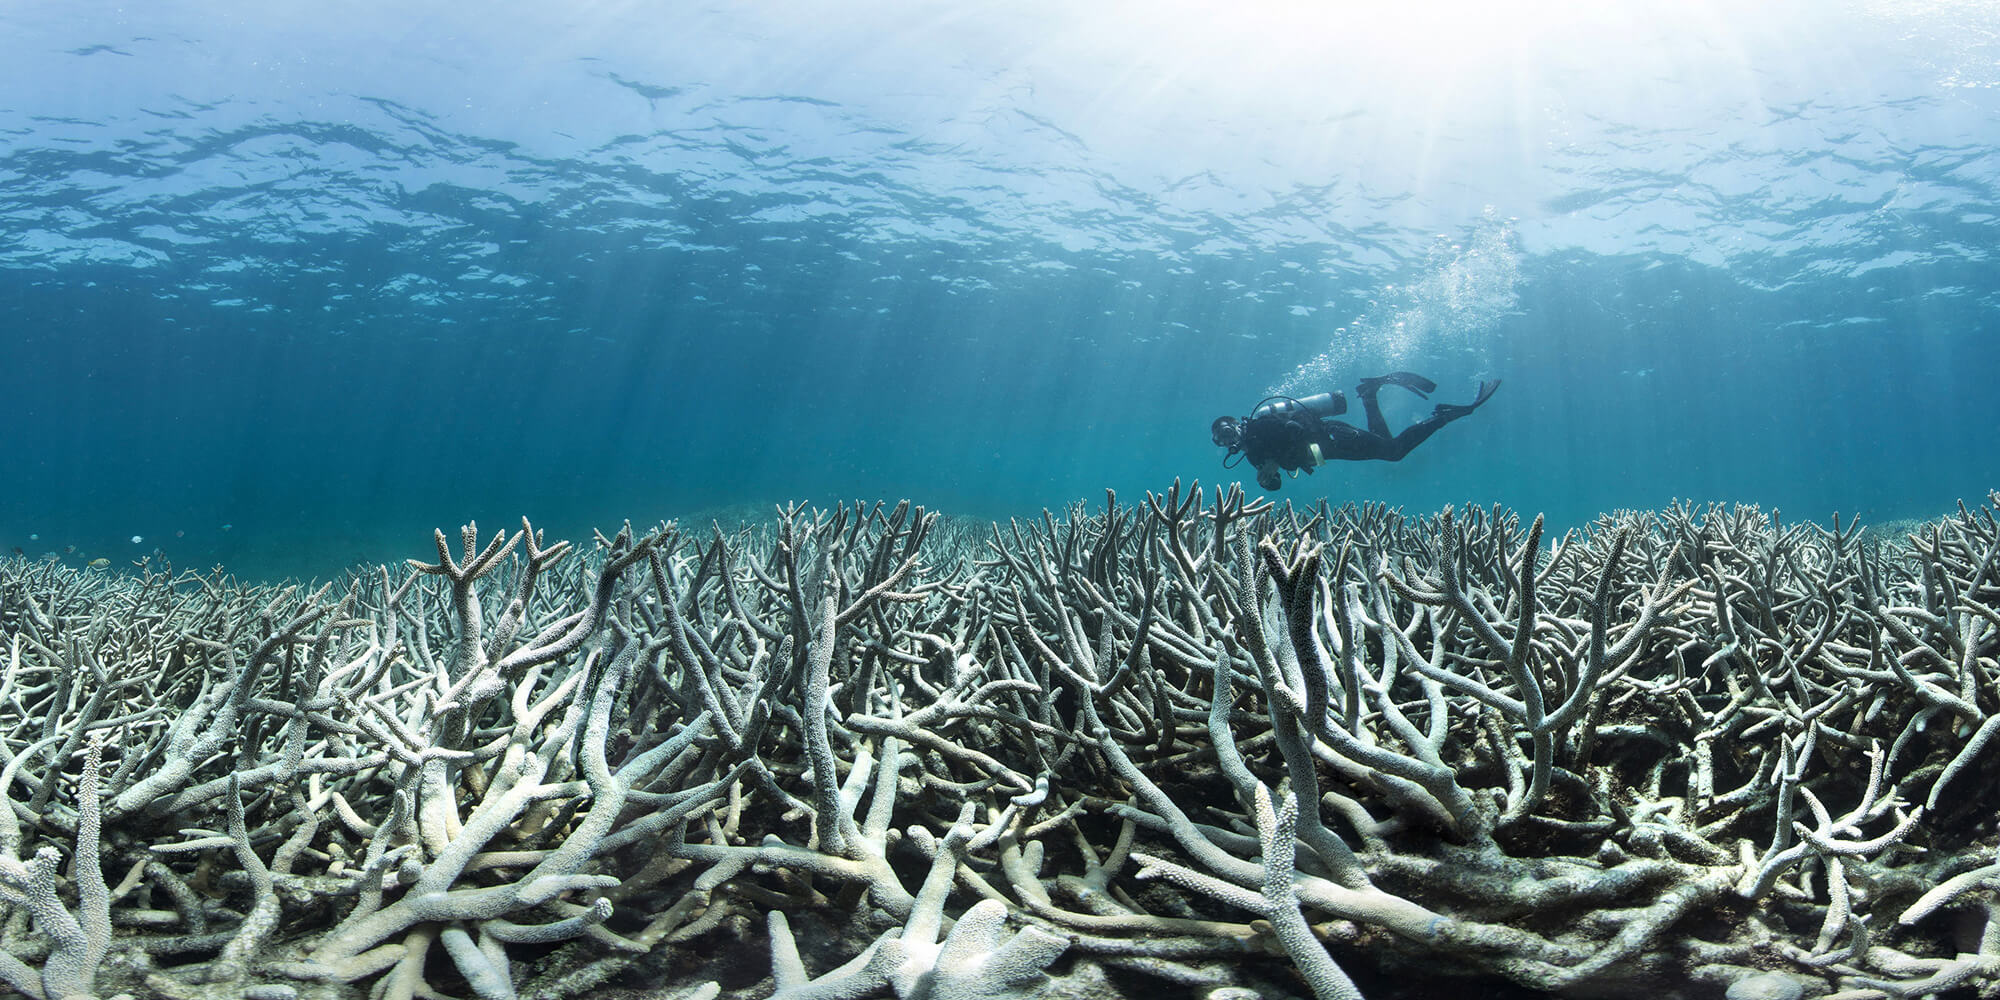 Coral Reefs: The Impacts of Coral Bleaching